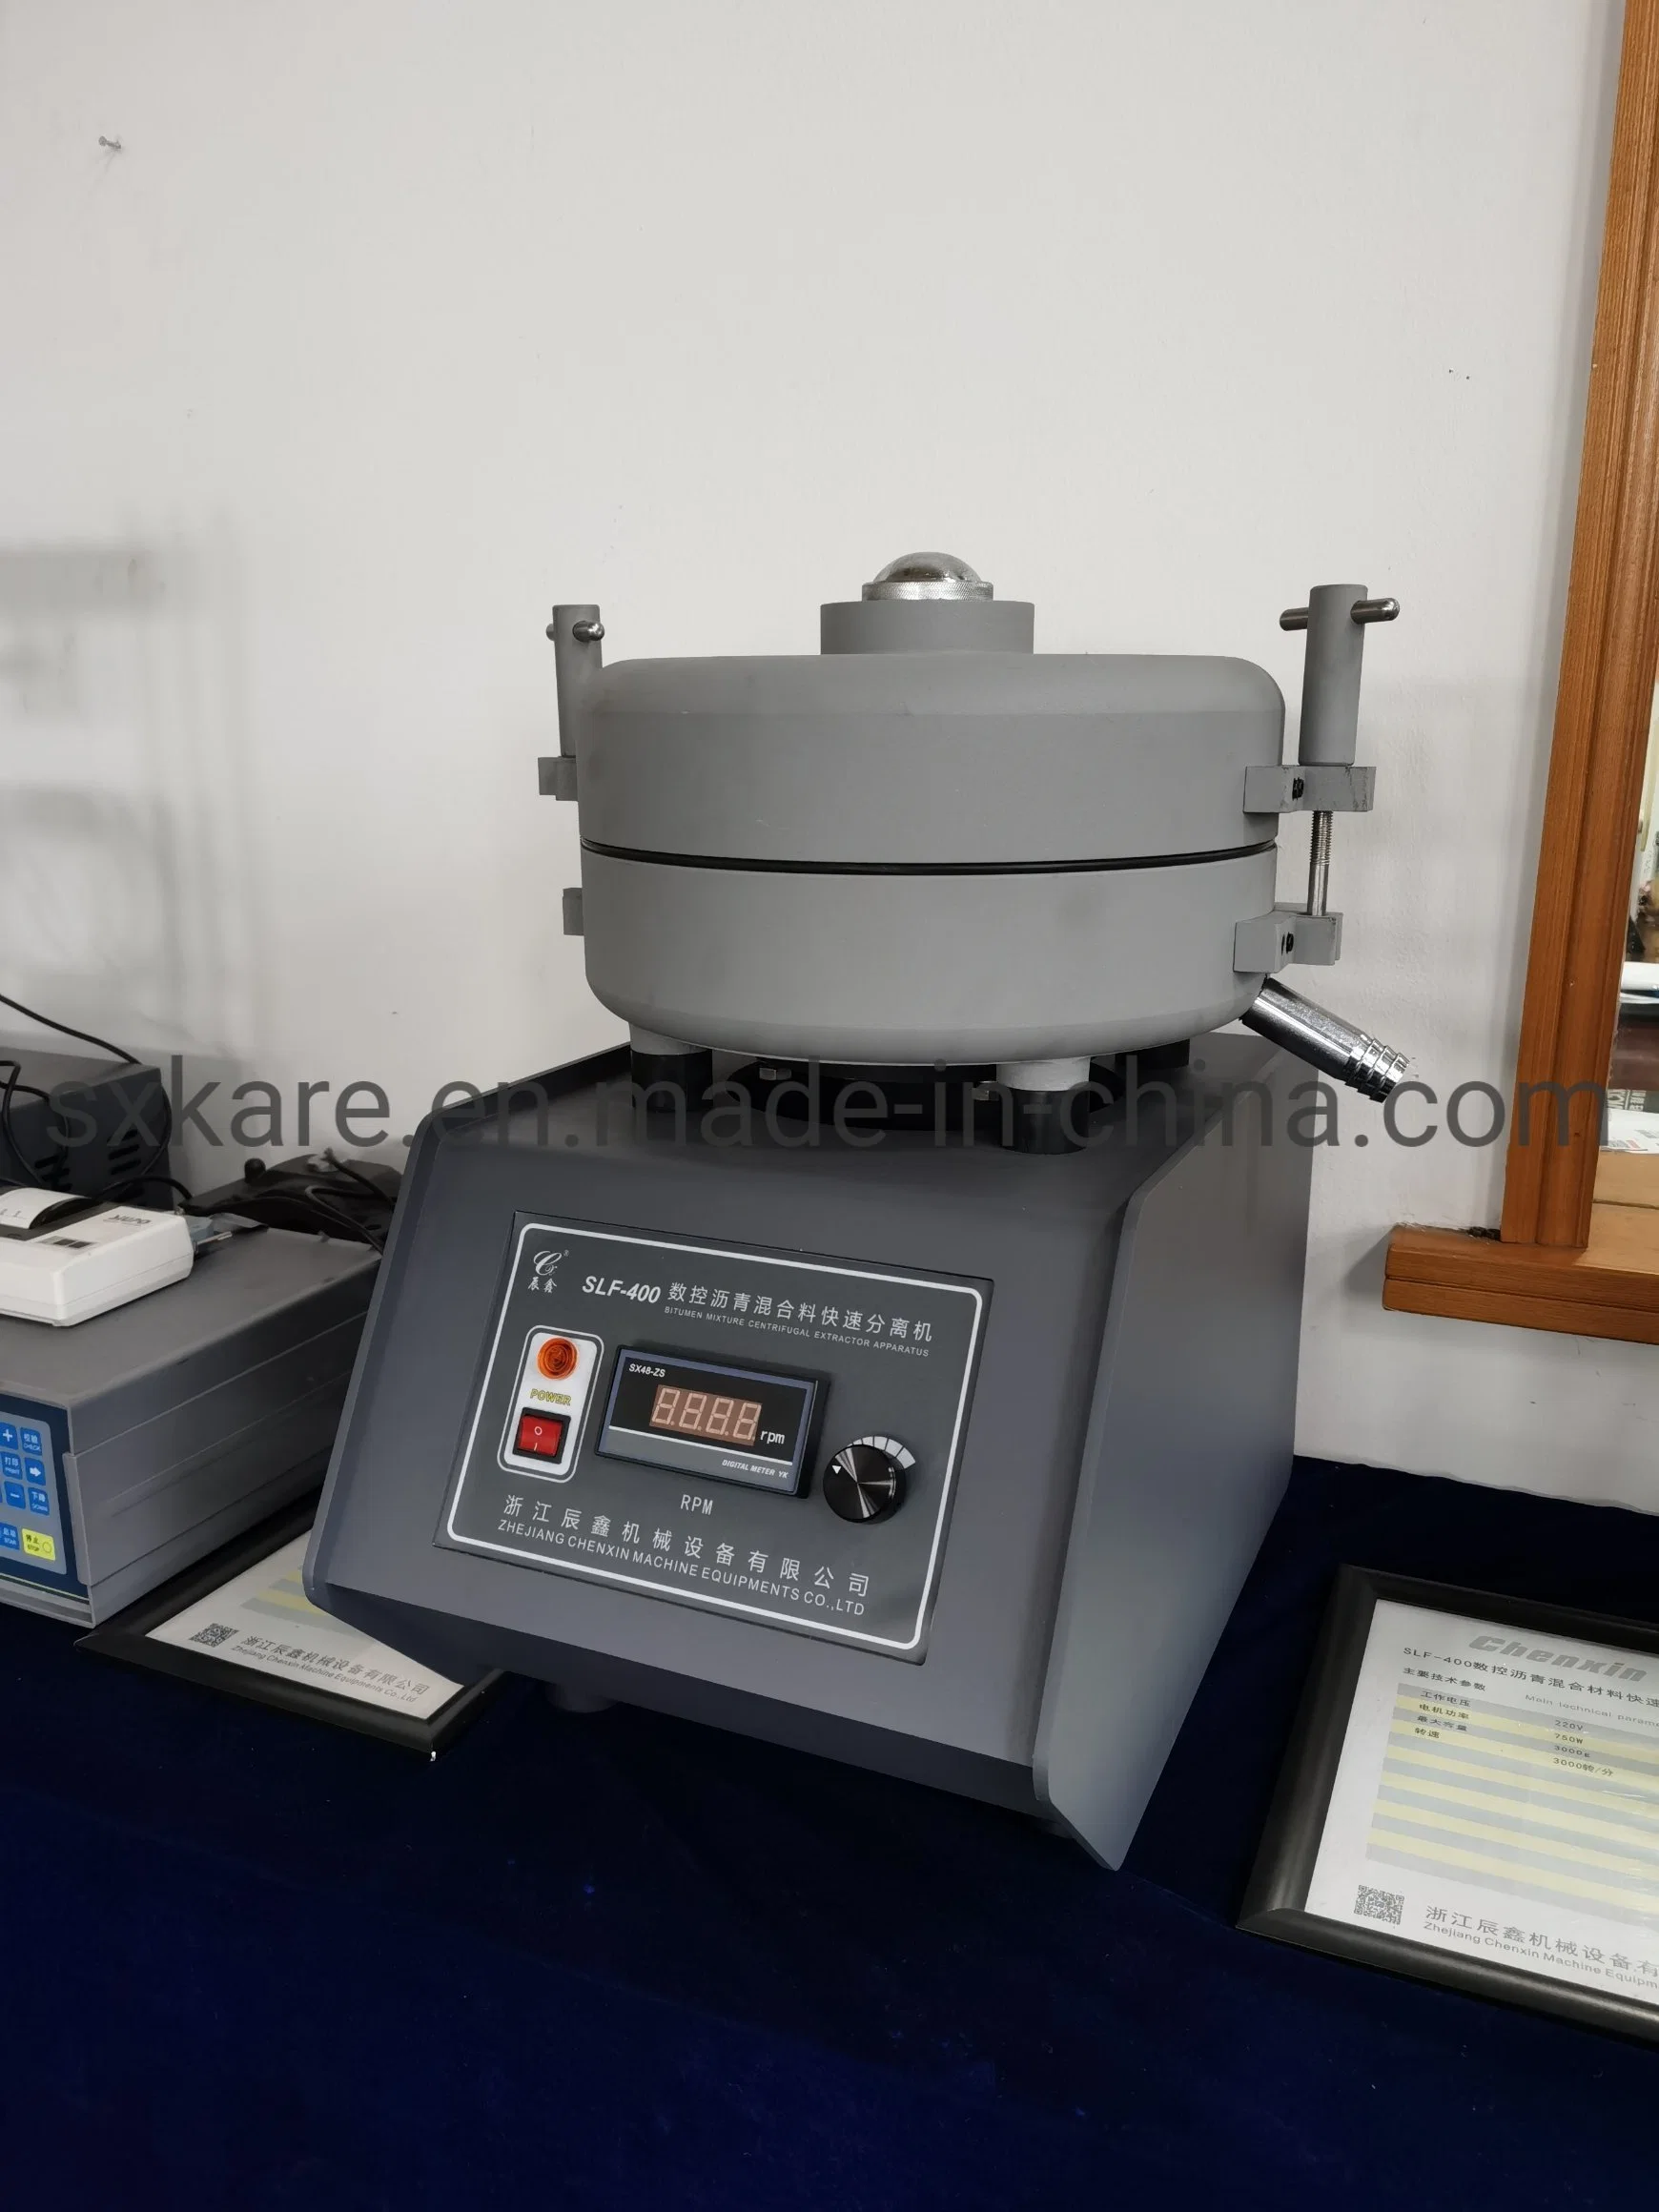 Bituminous Mixtures Centrifugal Extractor Testing Equipment with Rpm Meter (SLF-400)